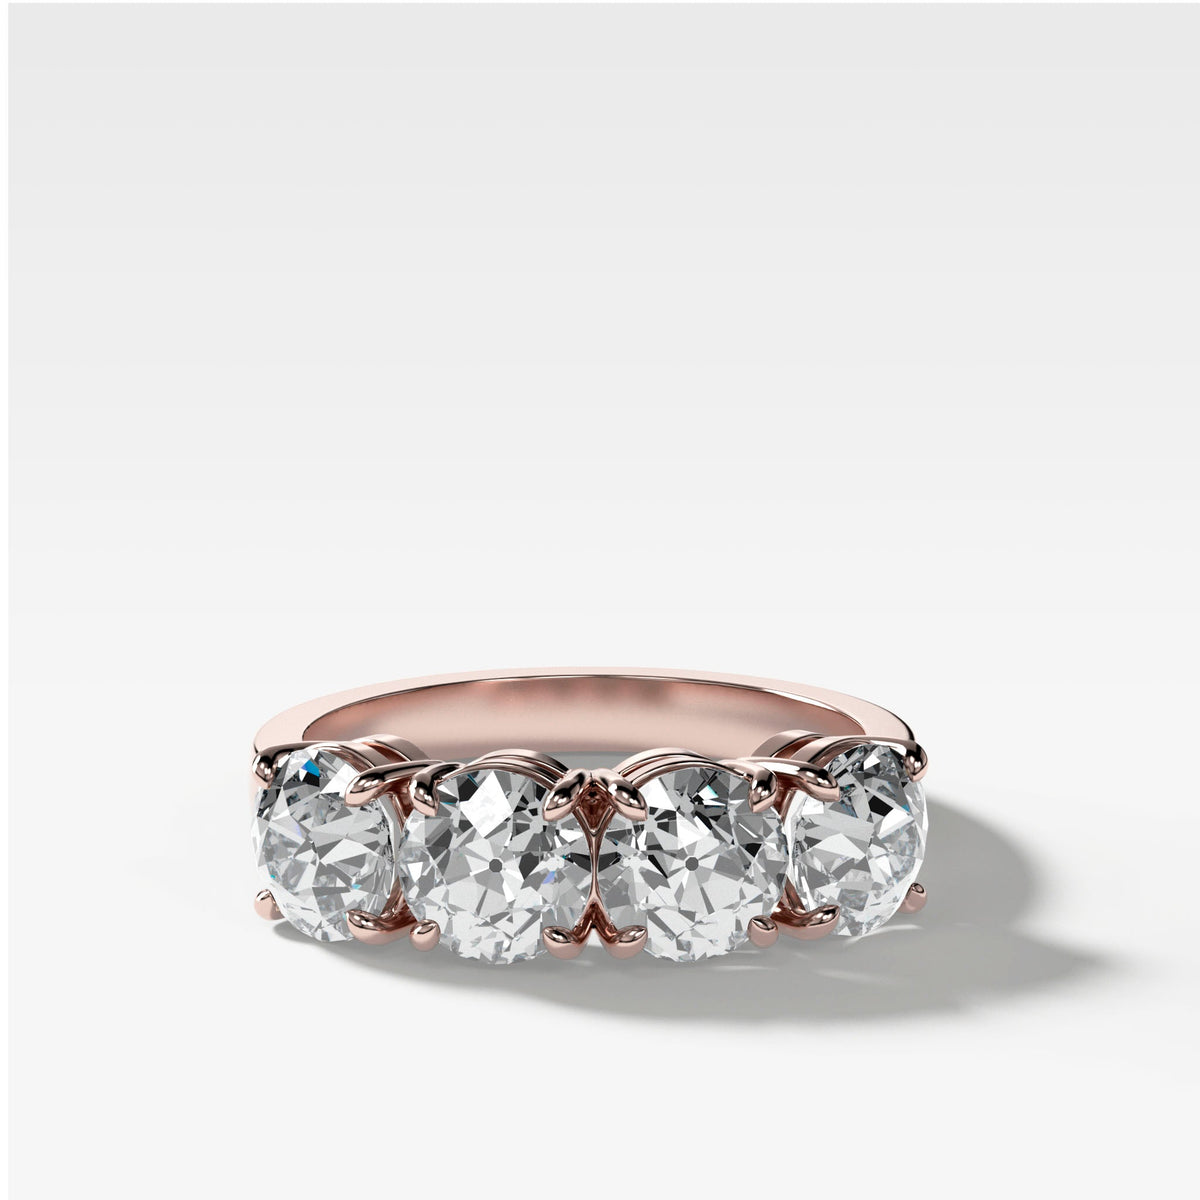 Four Stone Diamond Wedding Band With Old Euro Cuts in Rose Gold by Good Stone